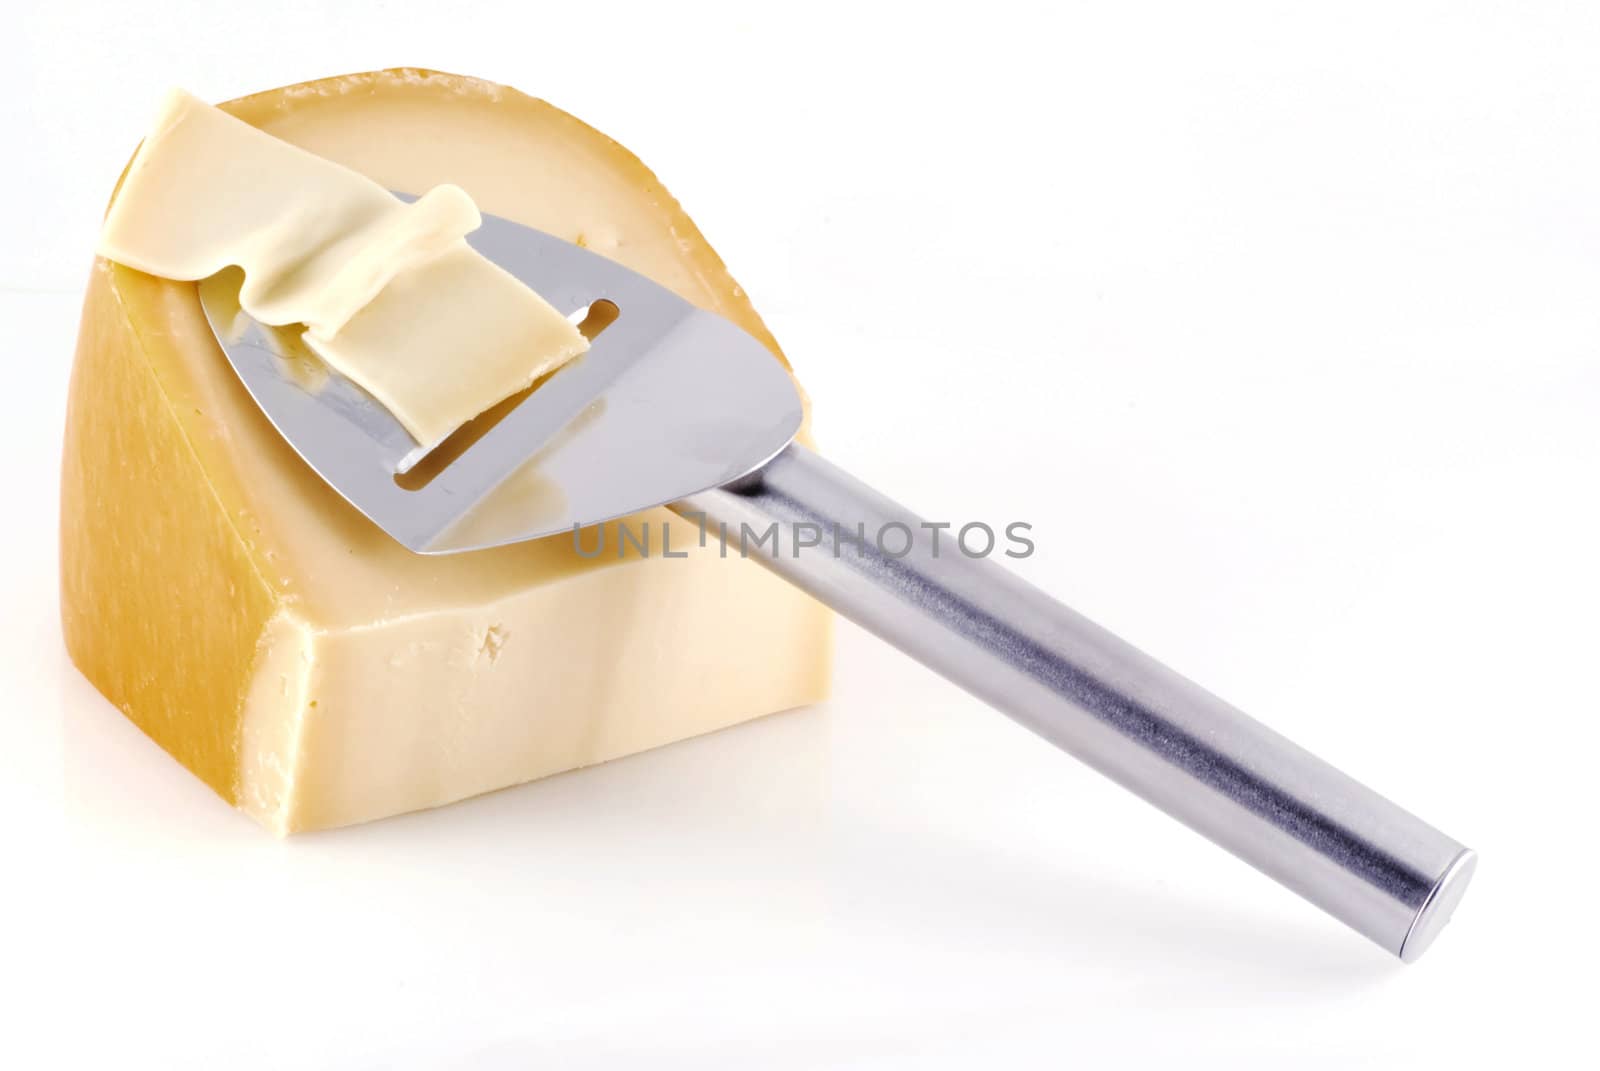 Cheese with slicer. by SasPartout